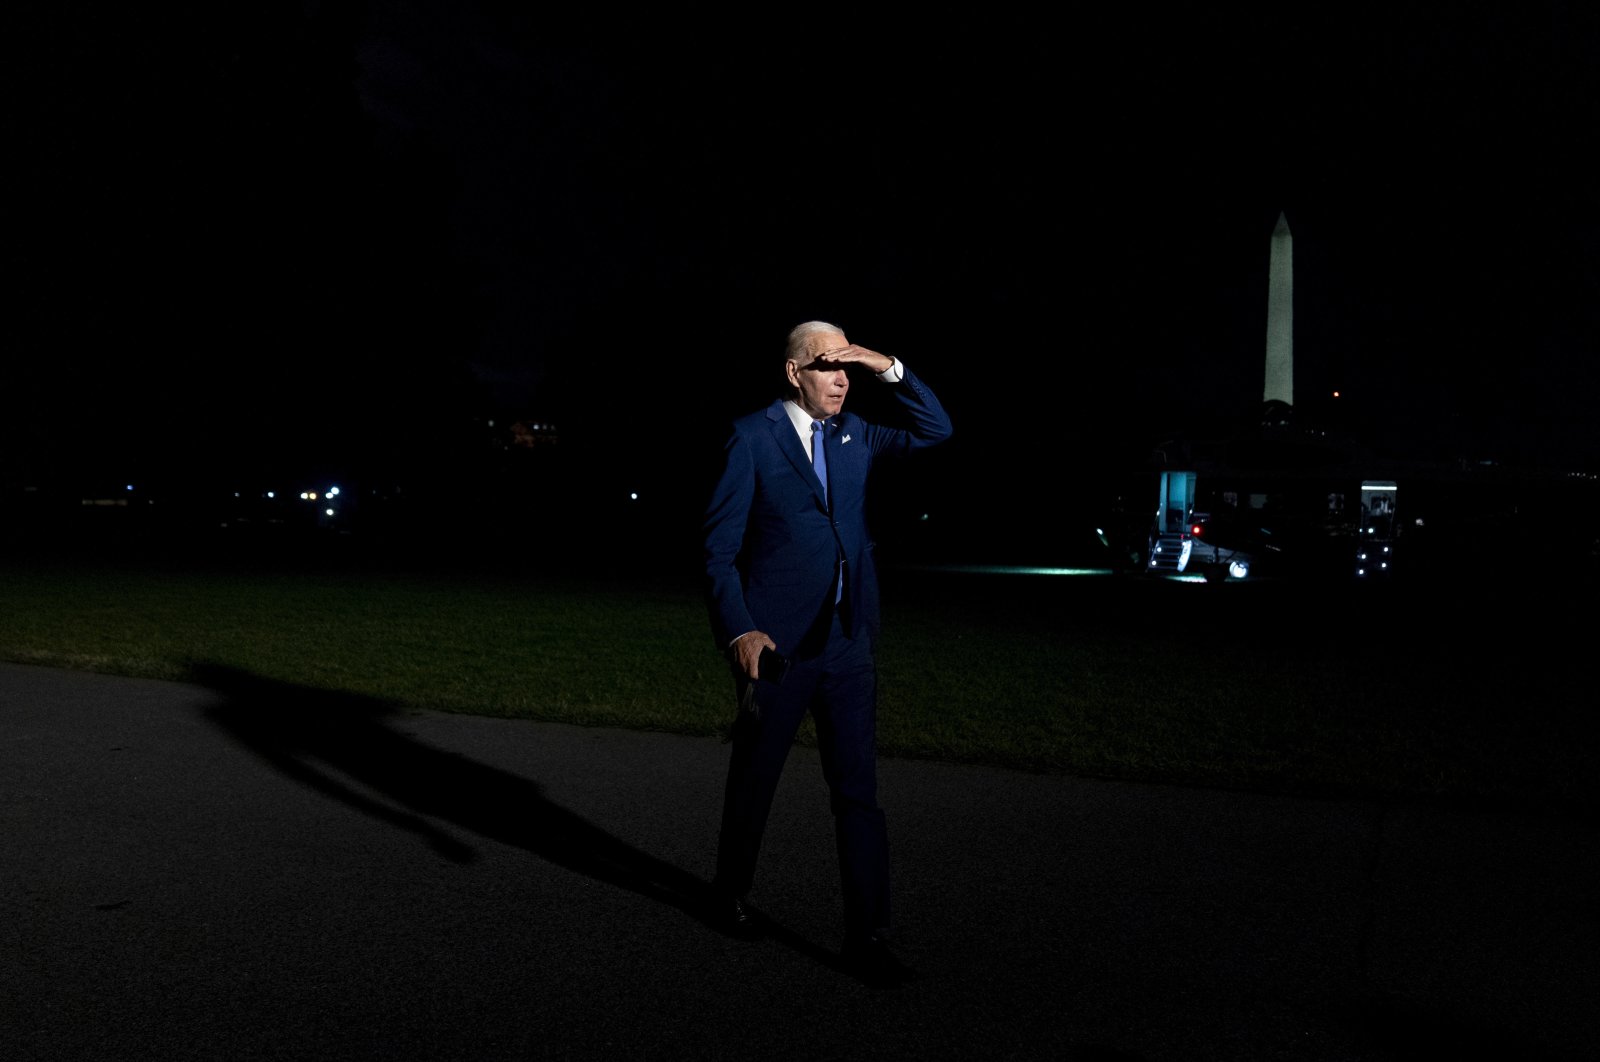 U.S. President Joe Biden arrives at the White House after returning from a trip to Israel and Saudi Arabia, in Washington, D.C., U.S., July 16, 2022. (AP Photo)